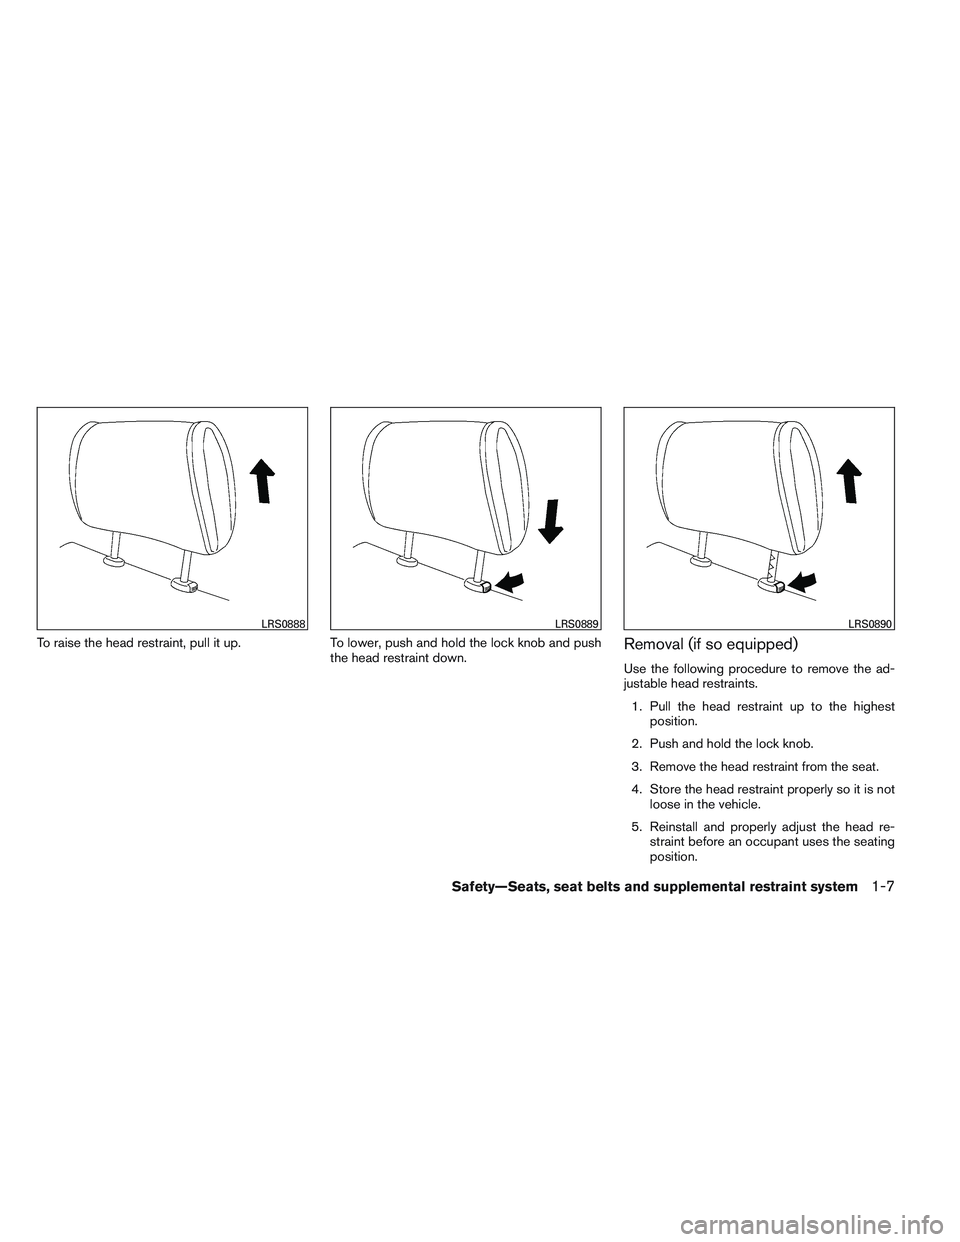 NISSAN VERSA 2013 Owners Manual To raise the head restraint, pull it up.To lower, push and hold the lock knob and push
the head restraint down.Removal (if so equipped)
Use the following procedure to remove the ad-
justable head rest